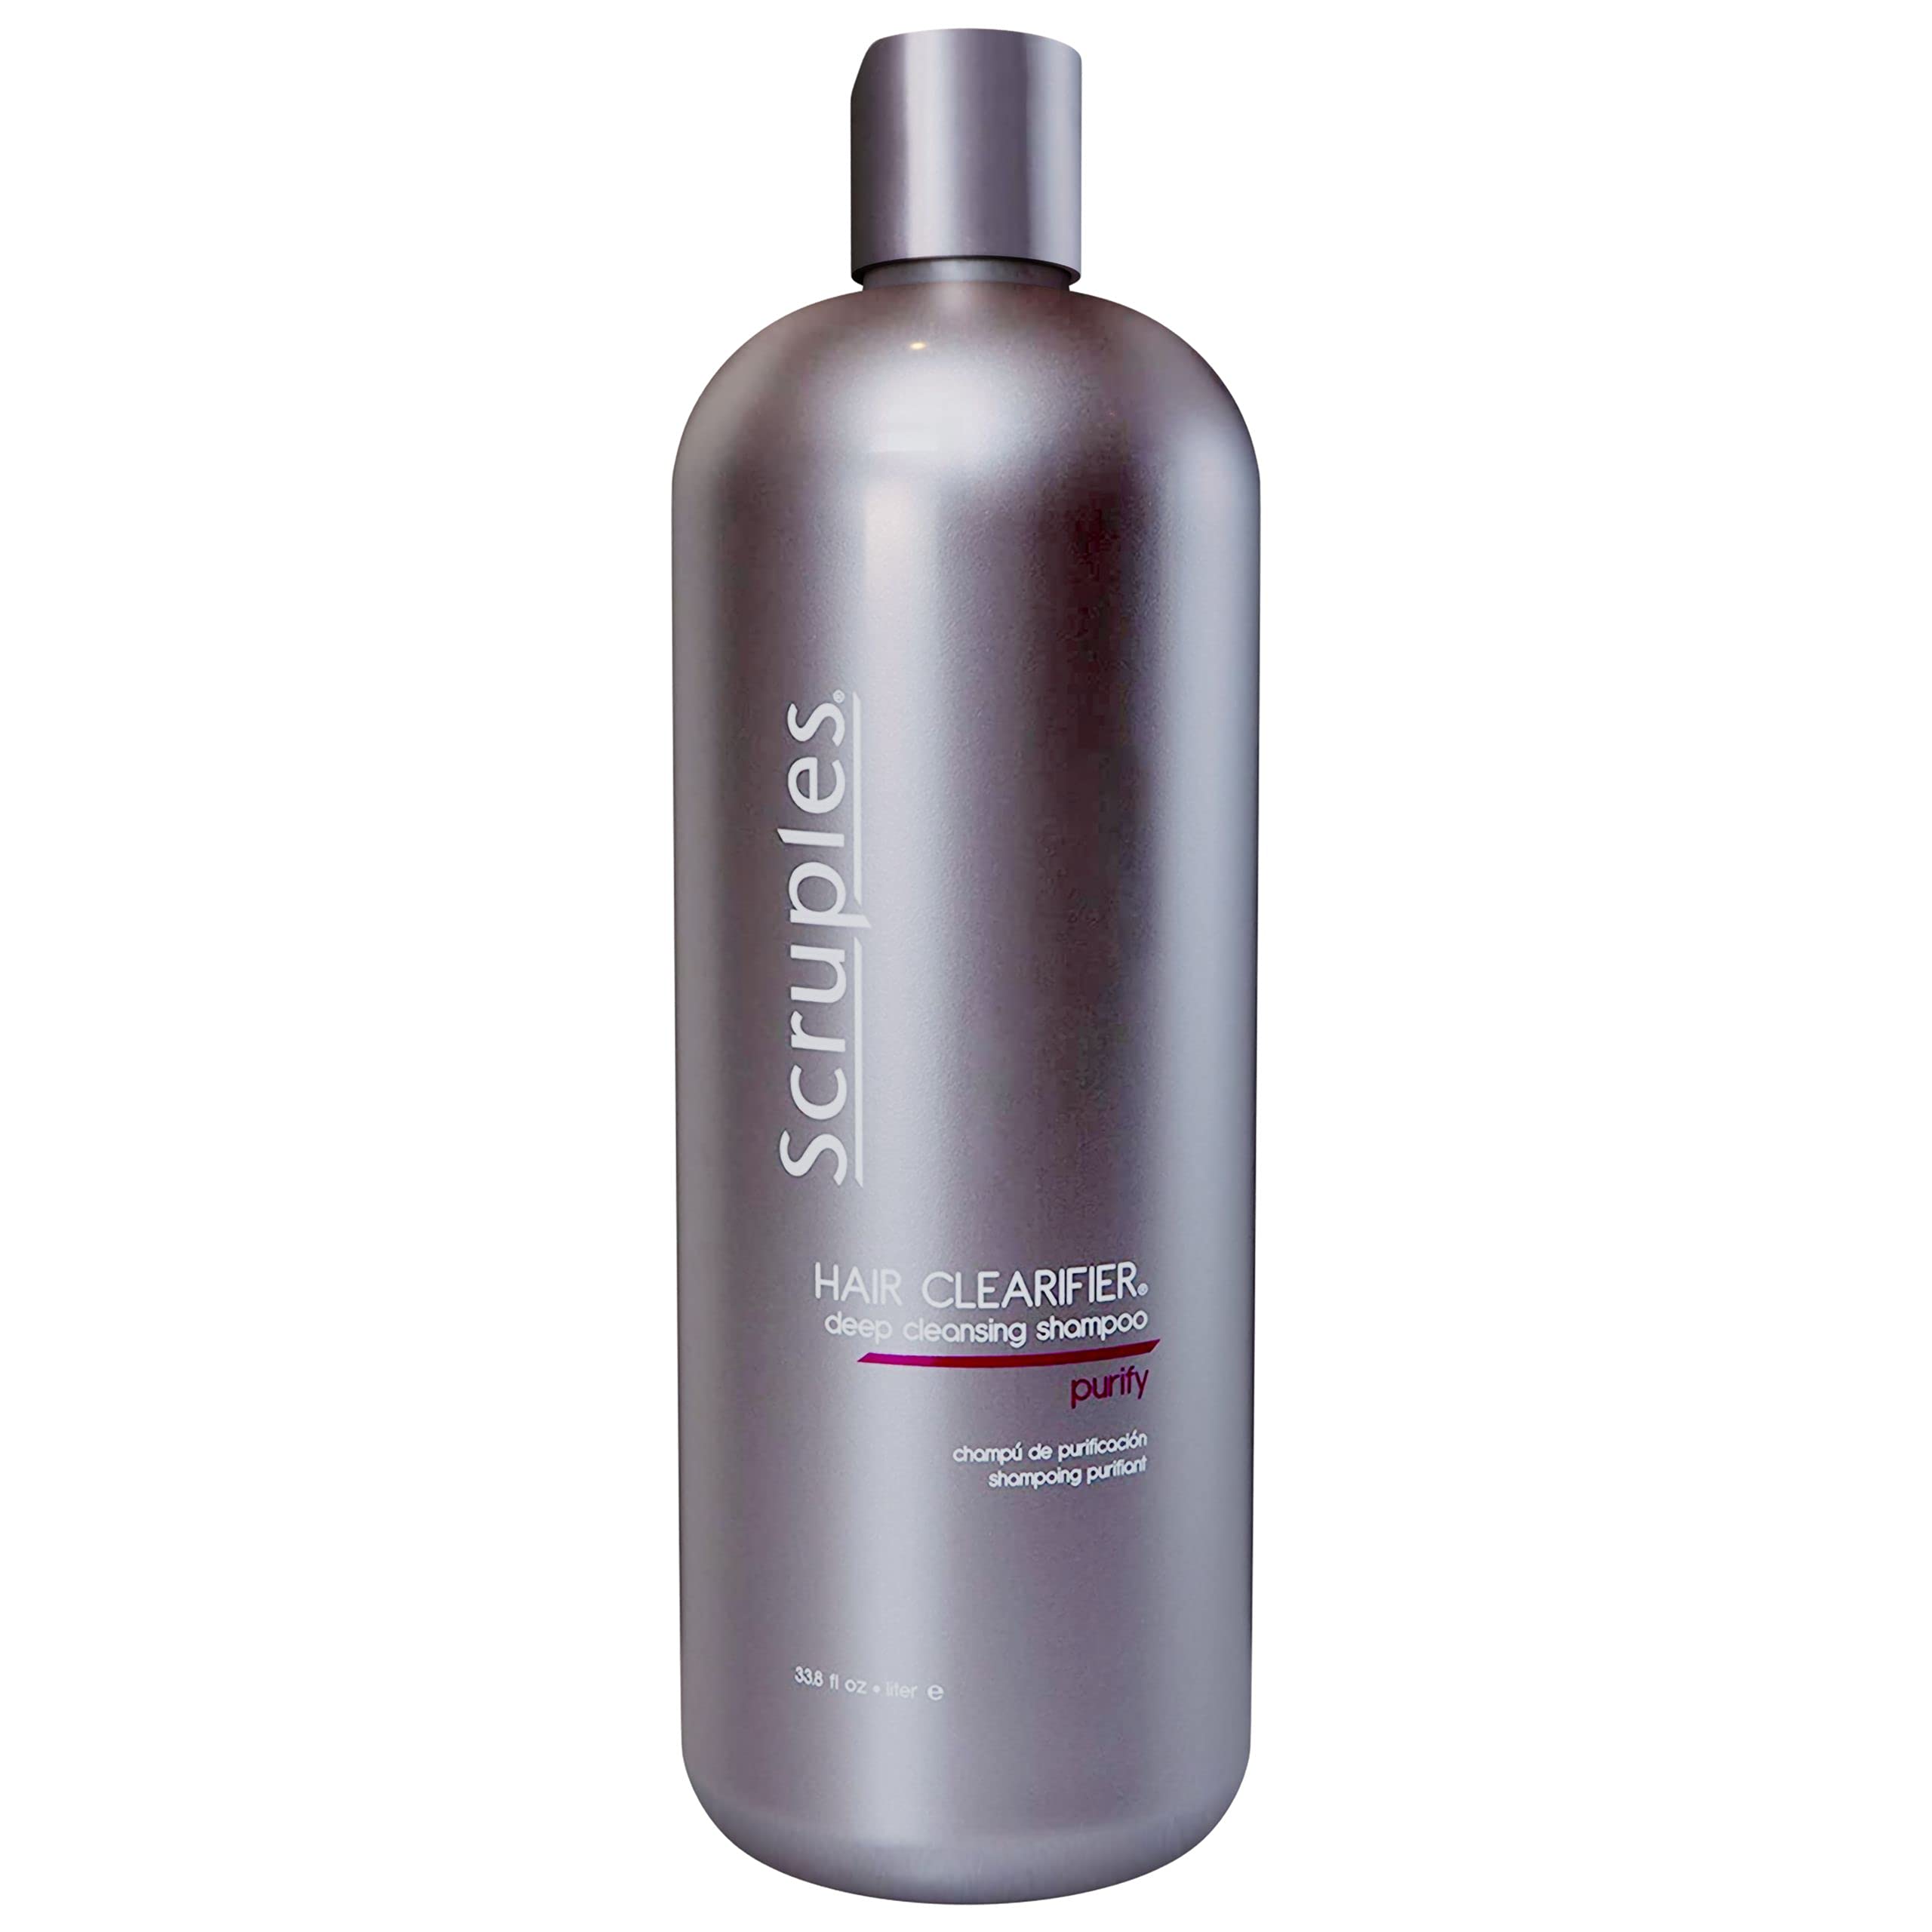 Scruples Hair Clearifier Deep Cleansing Shampoo - Clean & Refresh Hair and Scalp - Soothing & Clarifying Shampoo - Removes Product, Oil Buildup and Residue